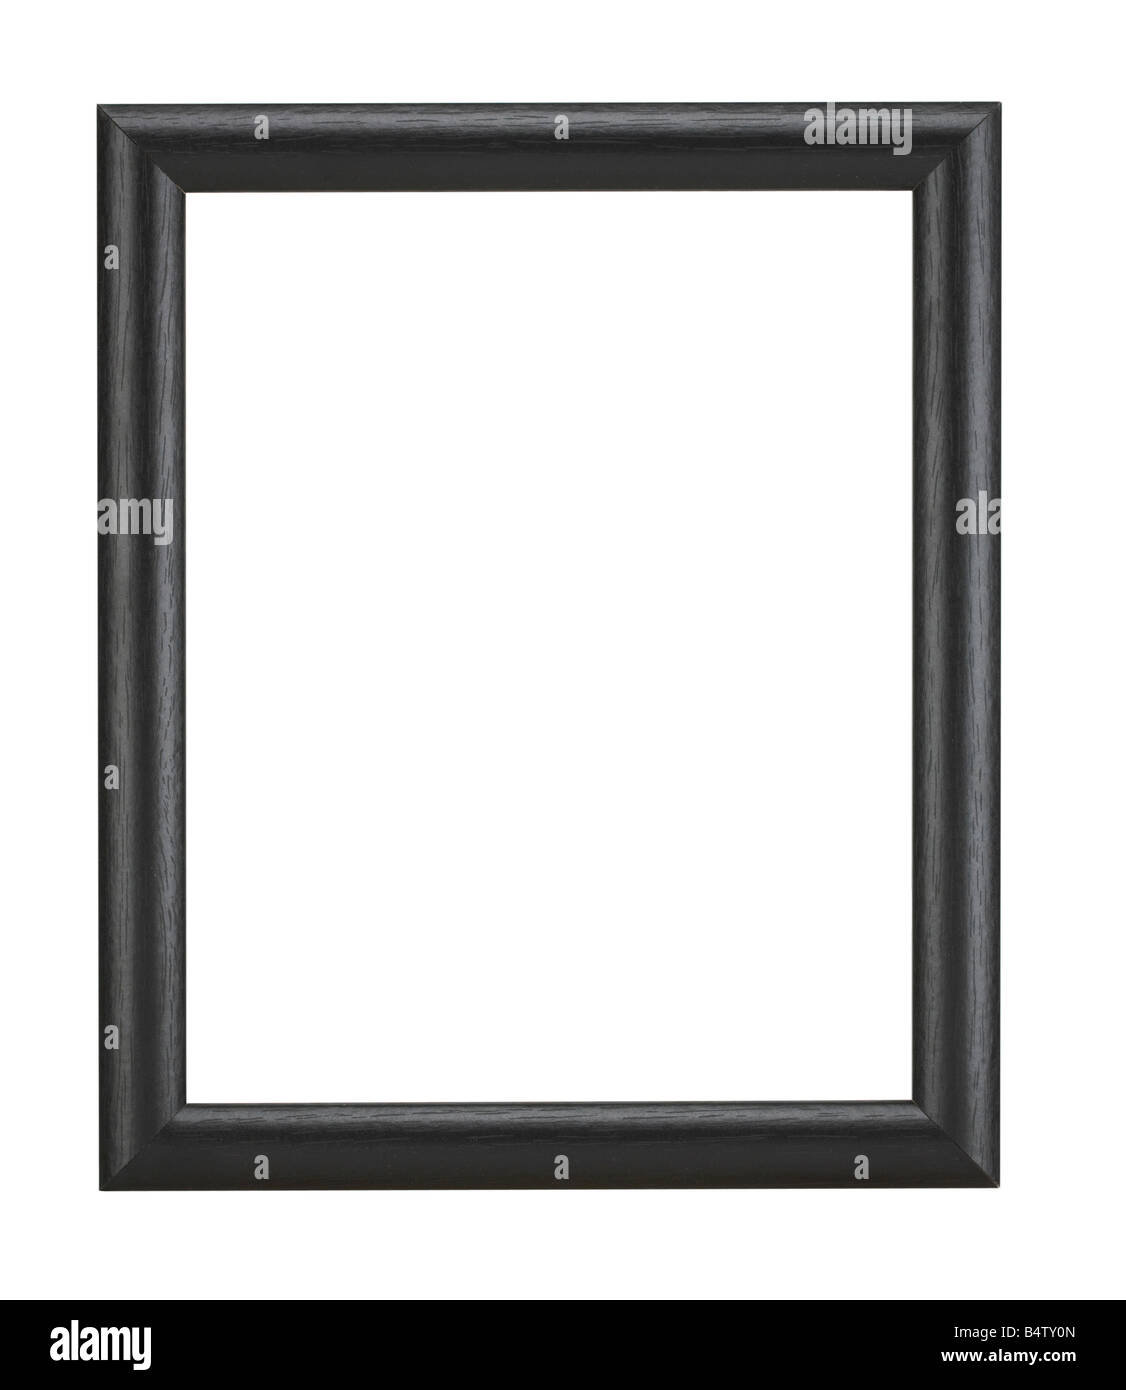 BLACK WOOD PICTURE FRAME Stock Photo